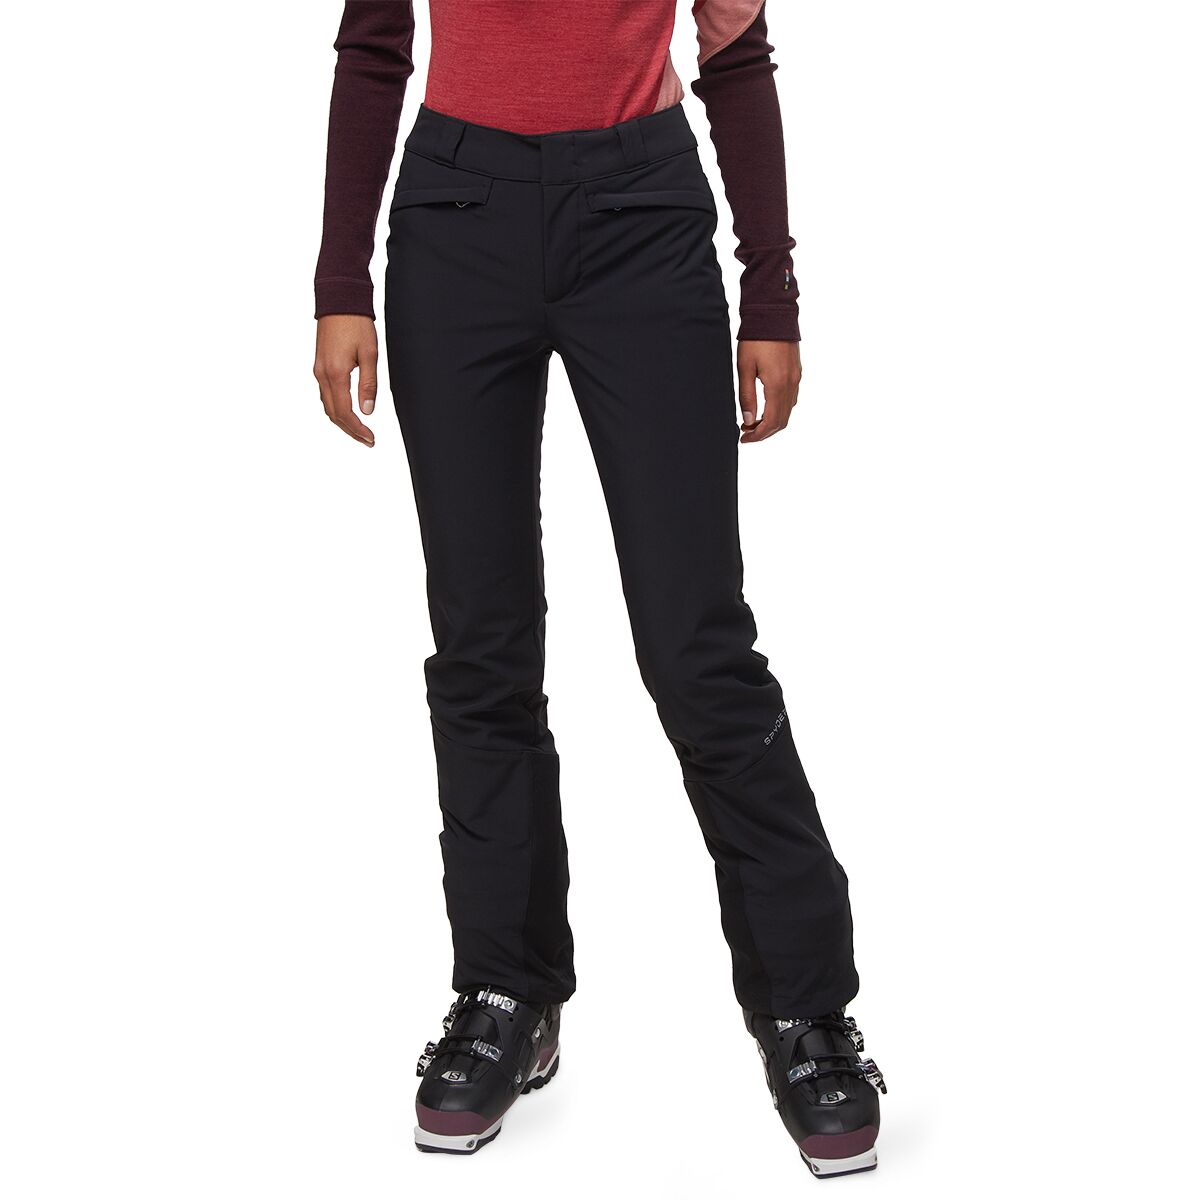 Spyder Orb Softshell Pant - Women's product image